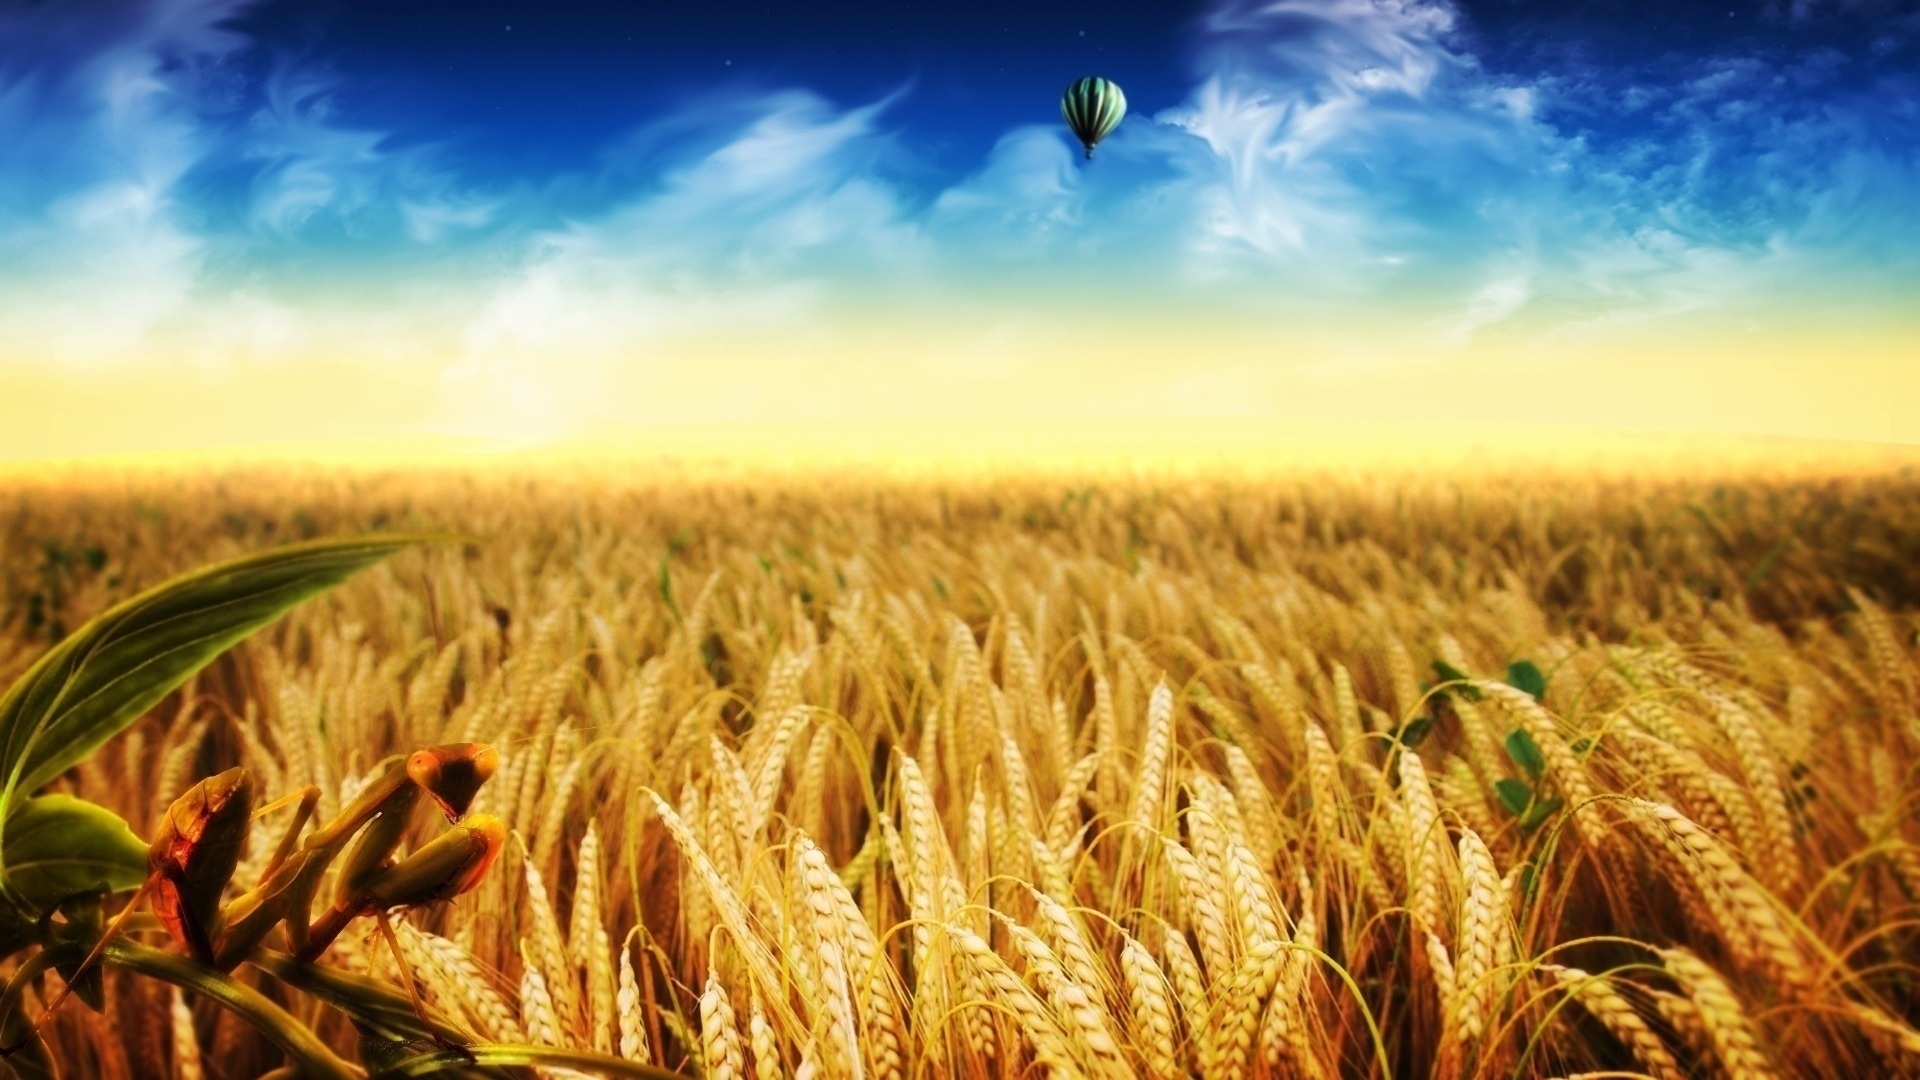 Wheat Field, Gold Autumn, Hot Air Balloon 640x960 IPhone 4 4S Wallpaper, Background, Picture, Image